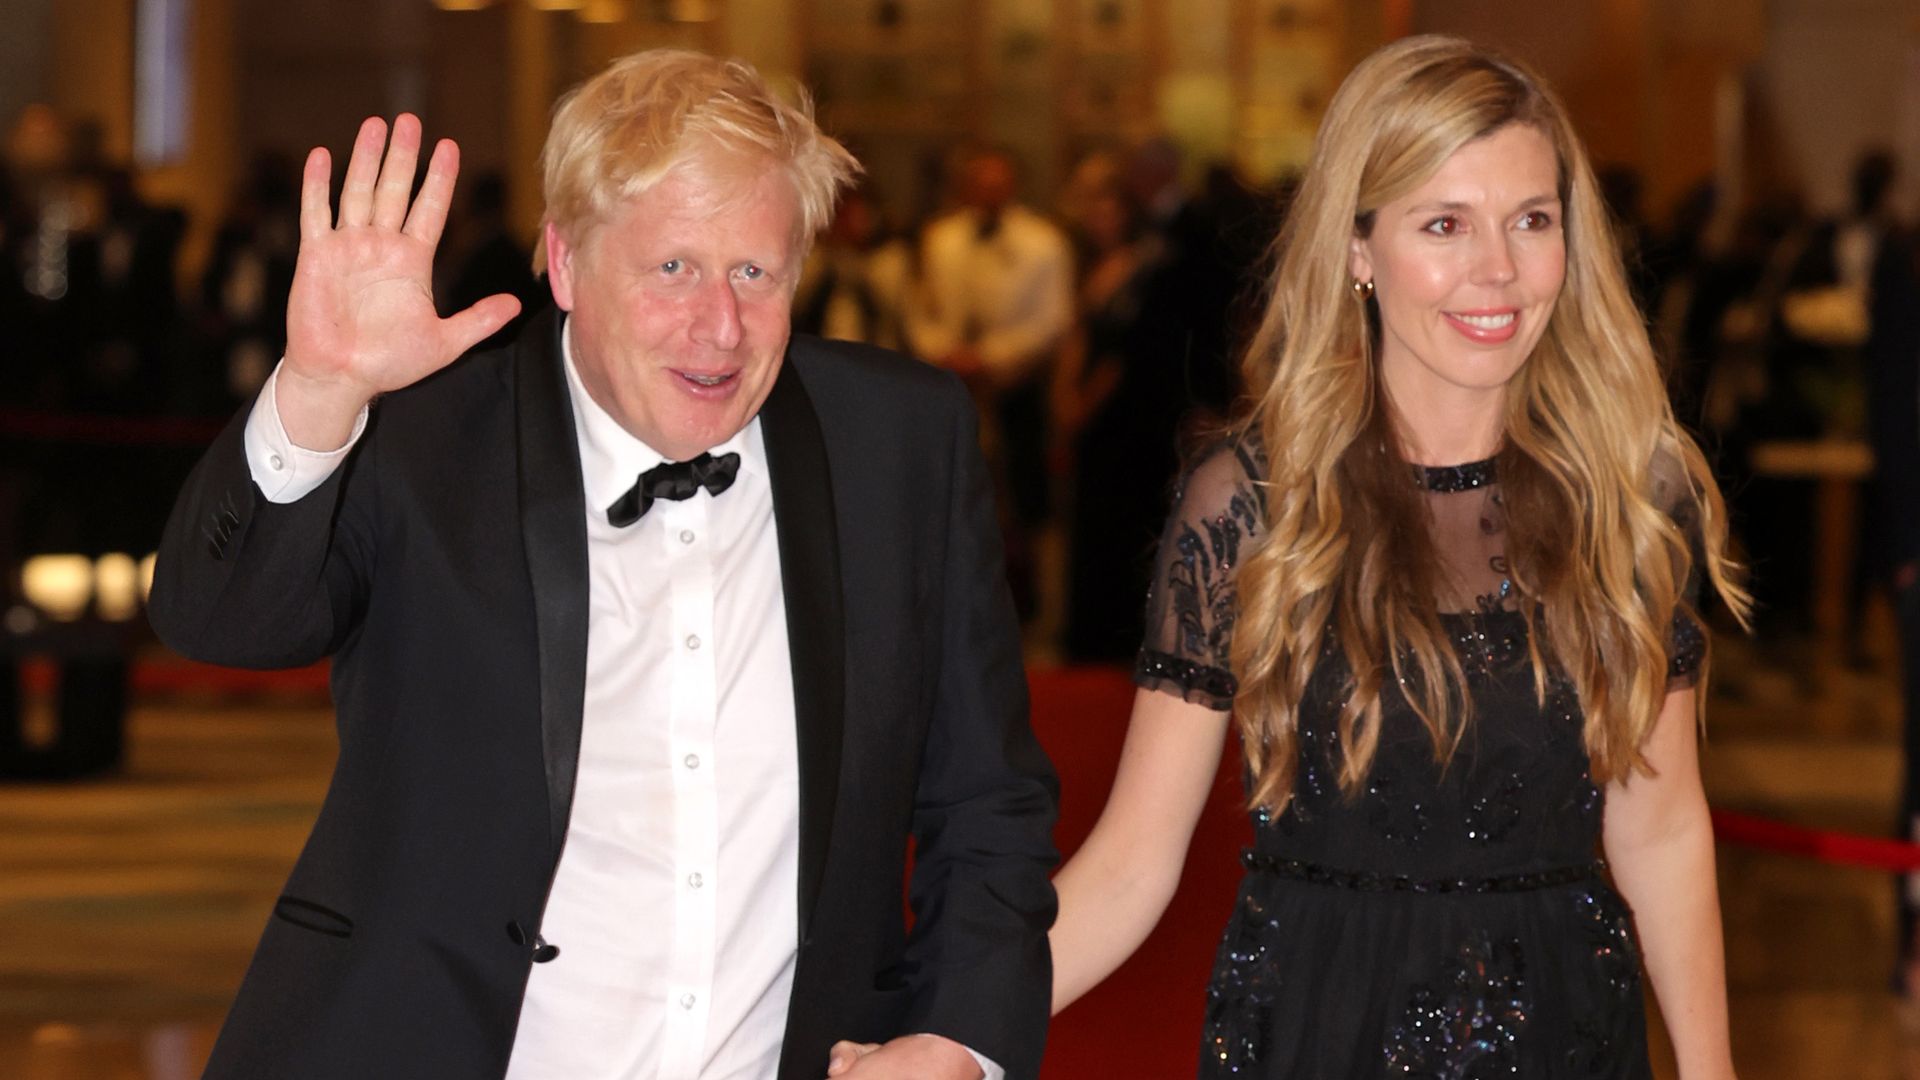 Boris Johnson in a suit walking with wife Carrie Johnson